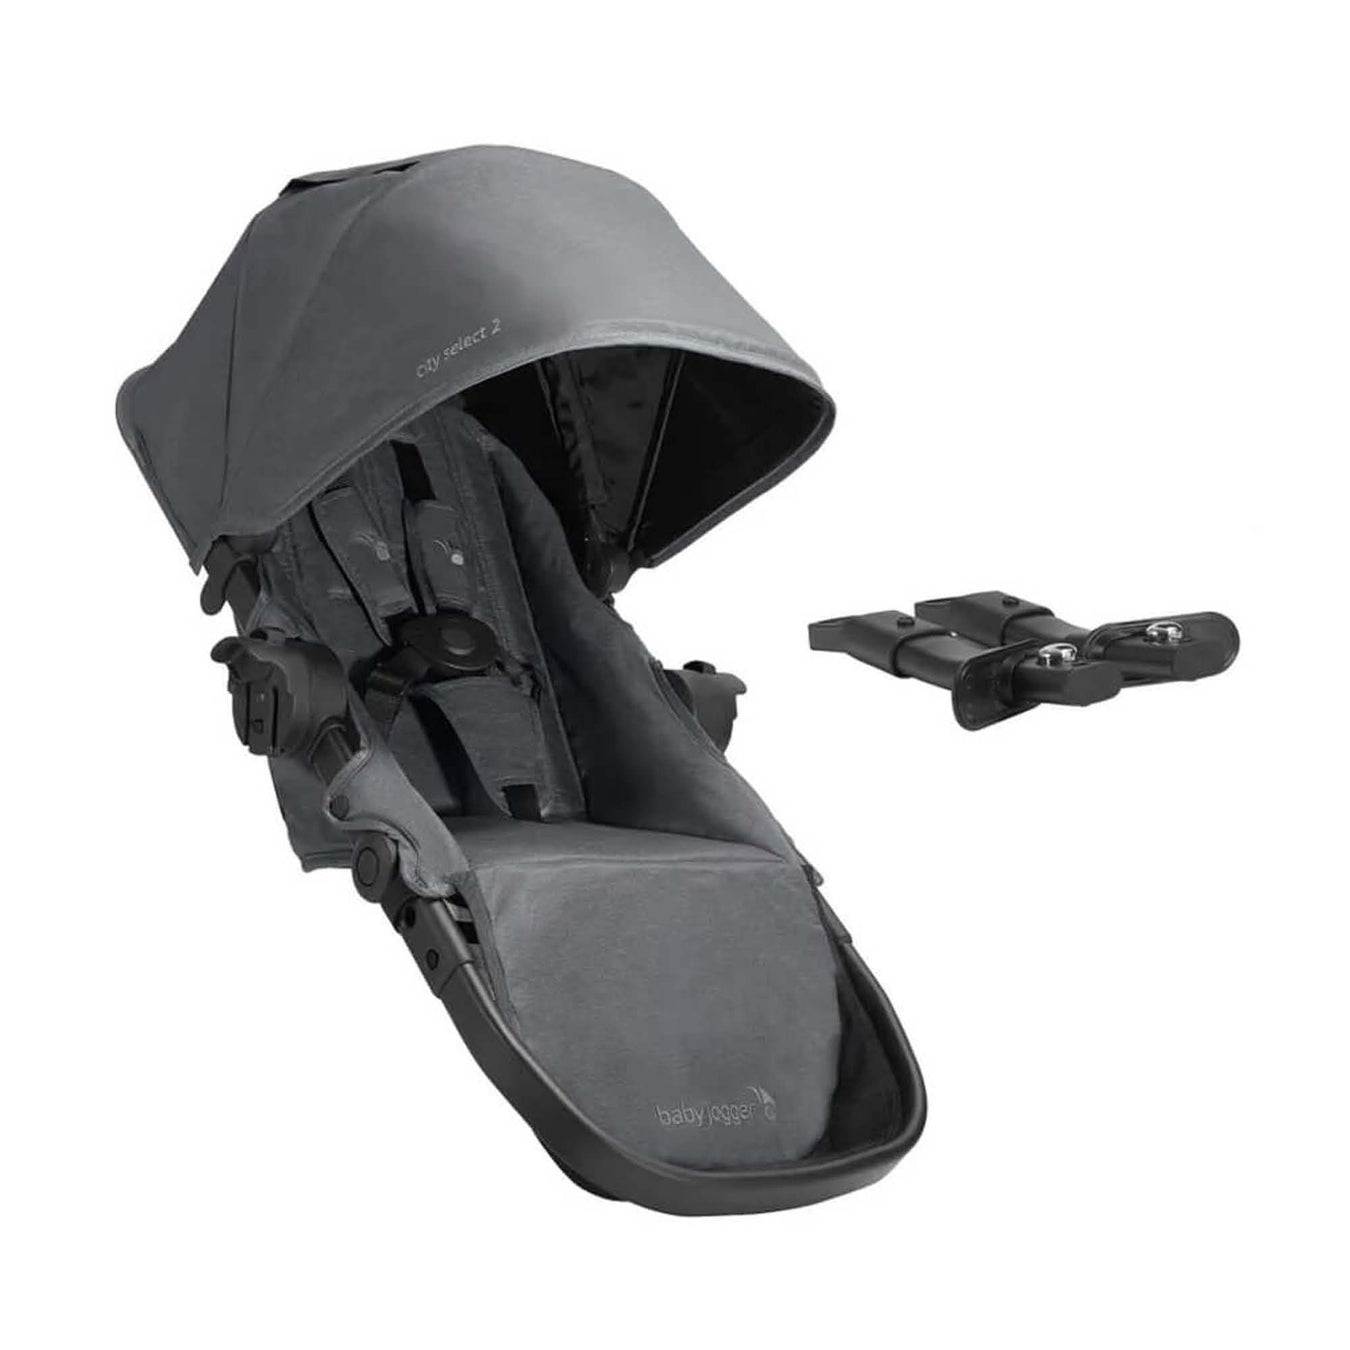 Prams & Strollers - Toddler Attachments